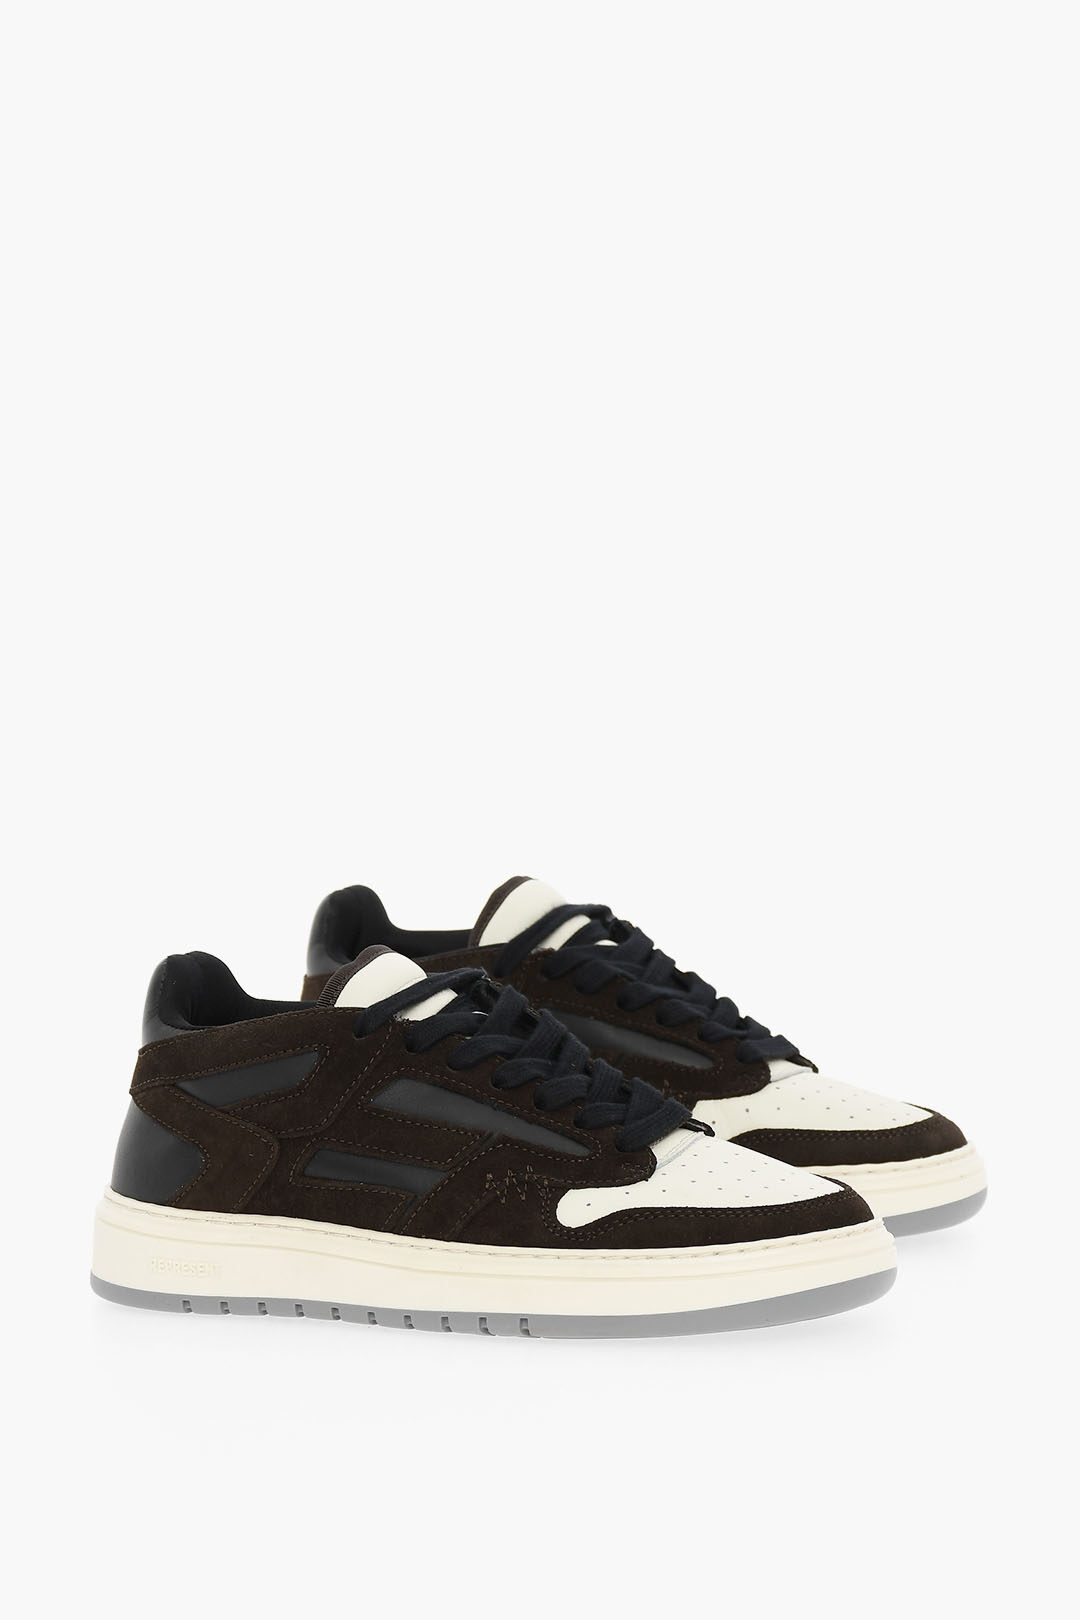 Represent Suede REPTOR Low-top Sneakers men - Glamood Outlet